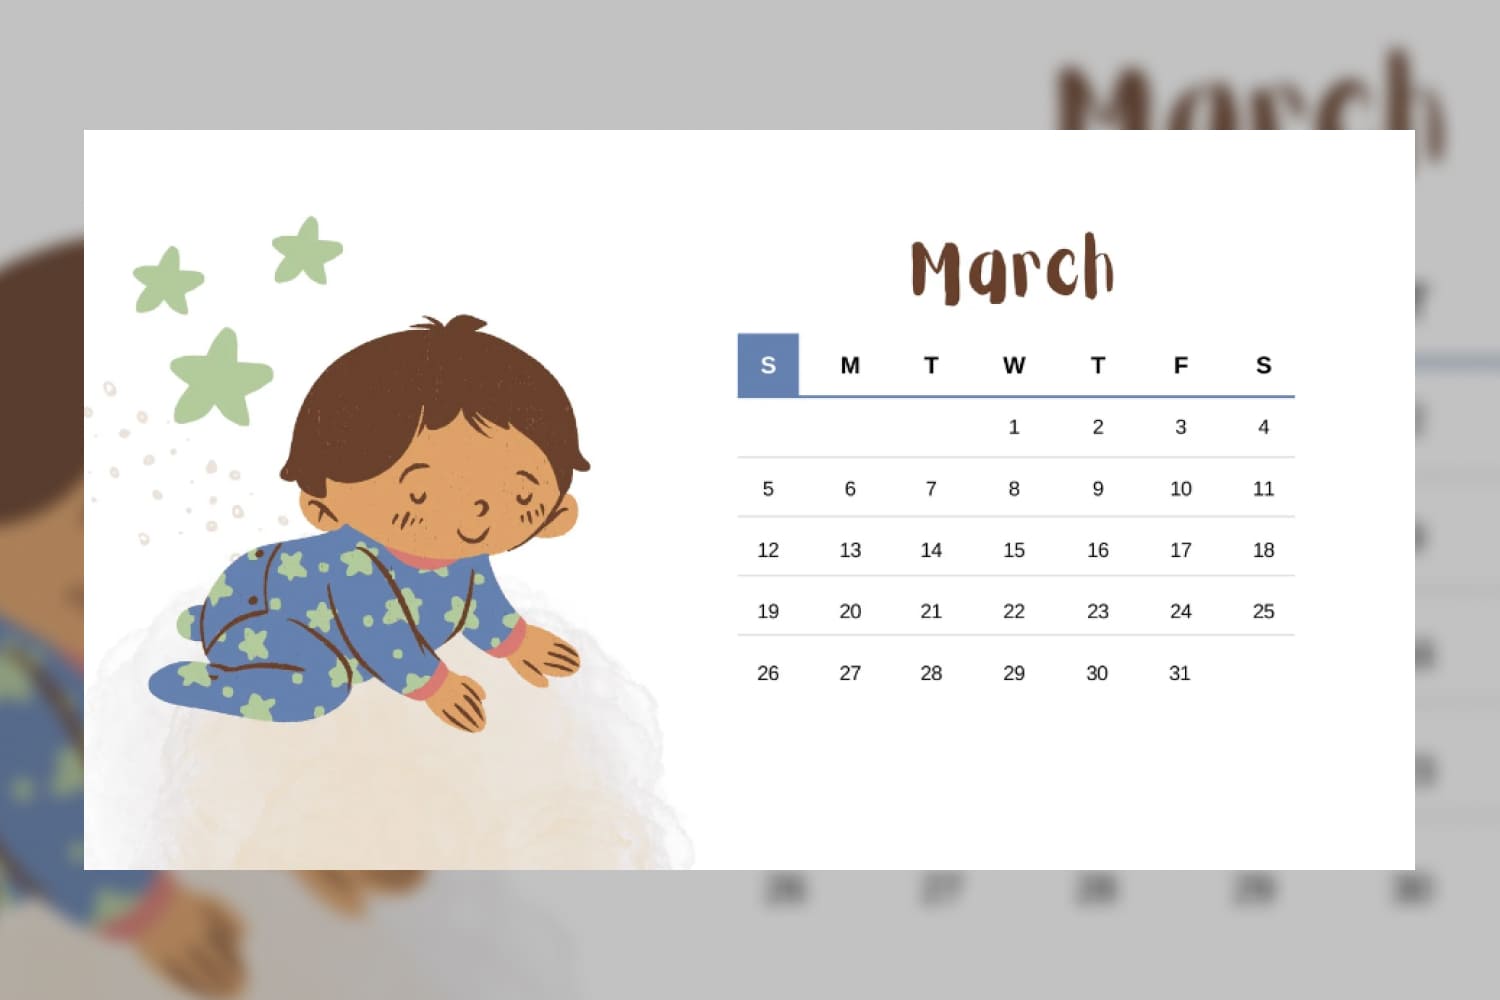 March calendar with minimalistic style and cute and colorful illustrations of a boy with stars.